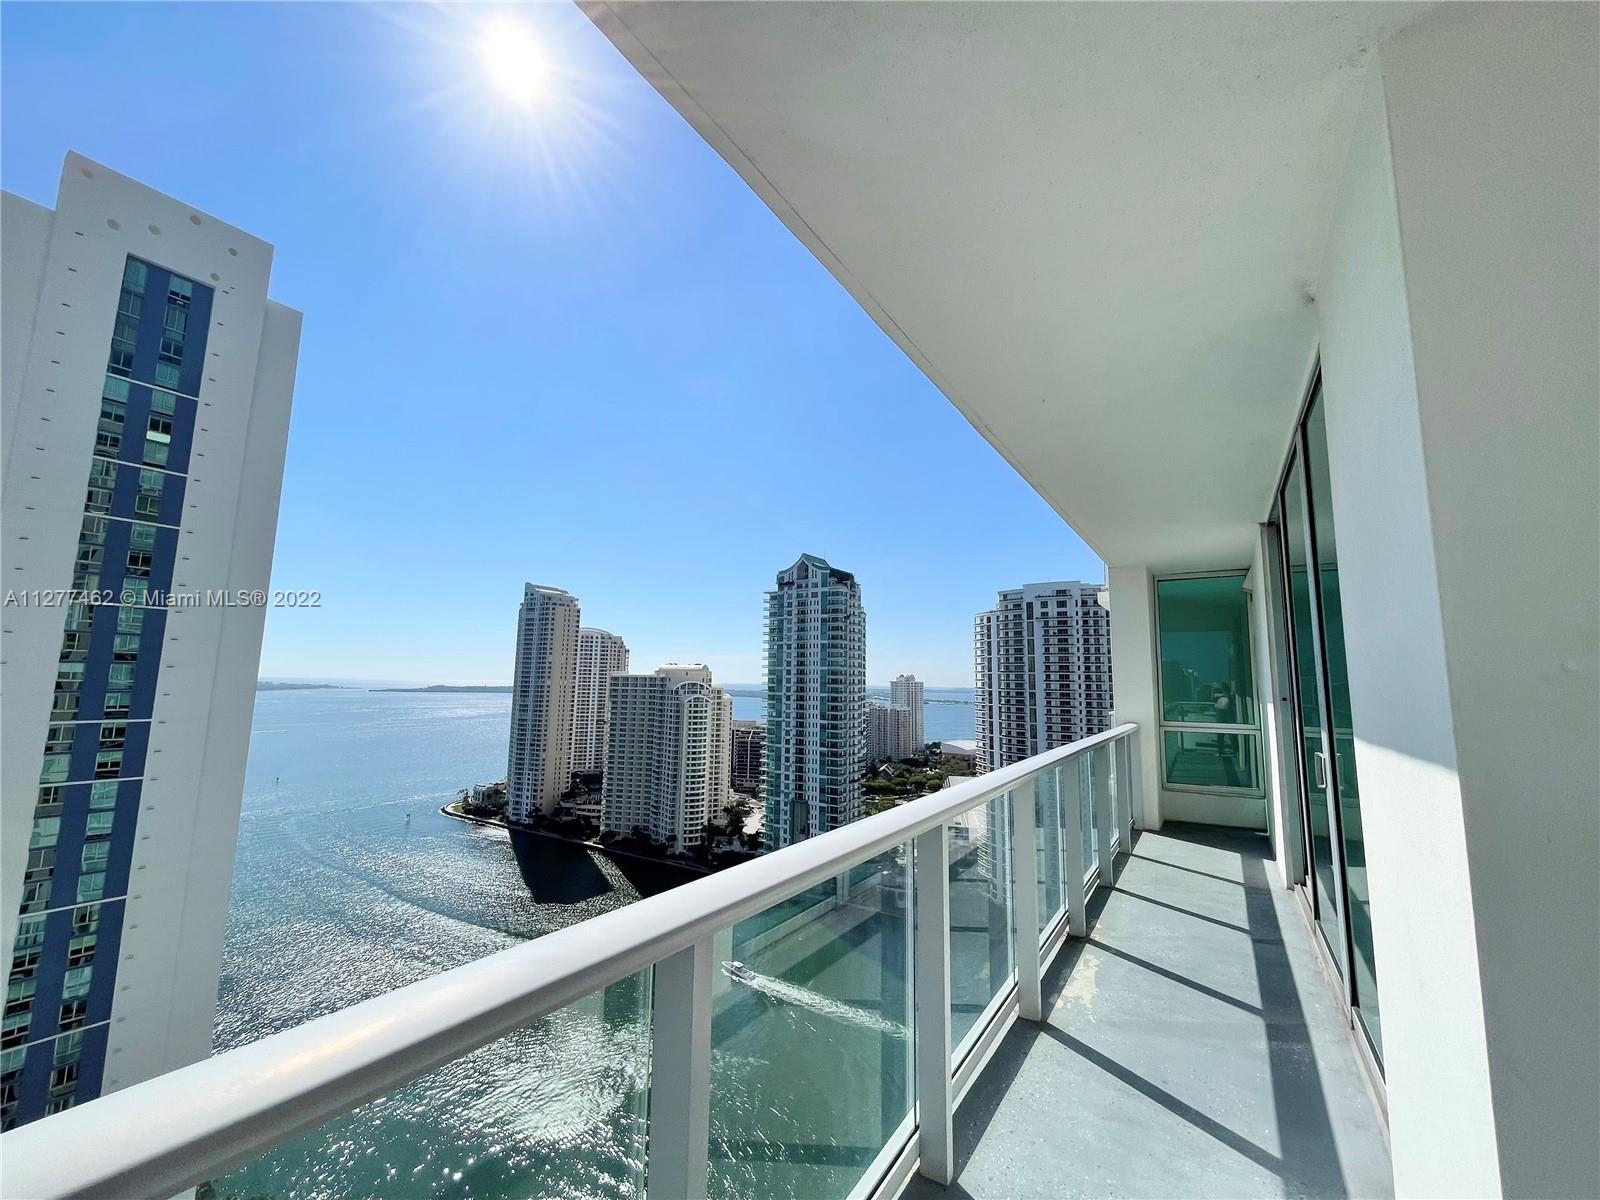 Corner Unit with fabulous water and city views from this spacious 2 Bedroom/2 Bath split plan. 2 ASS